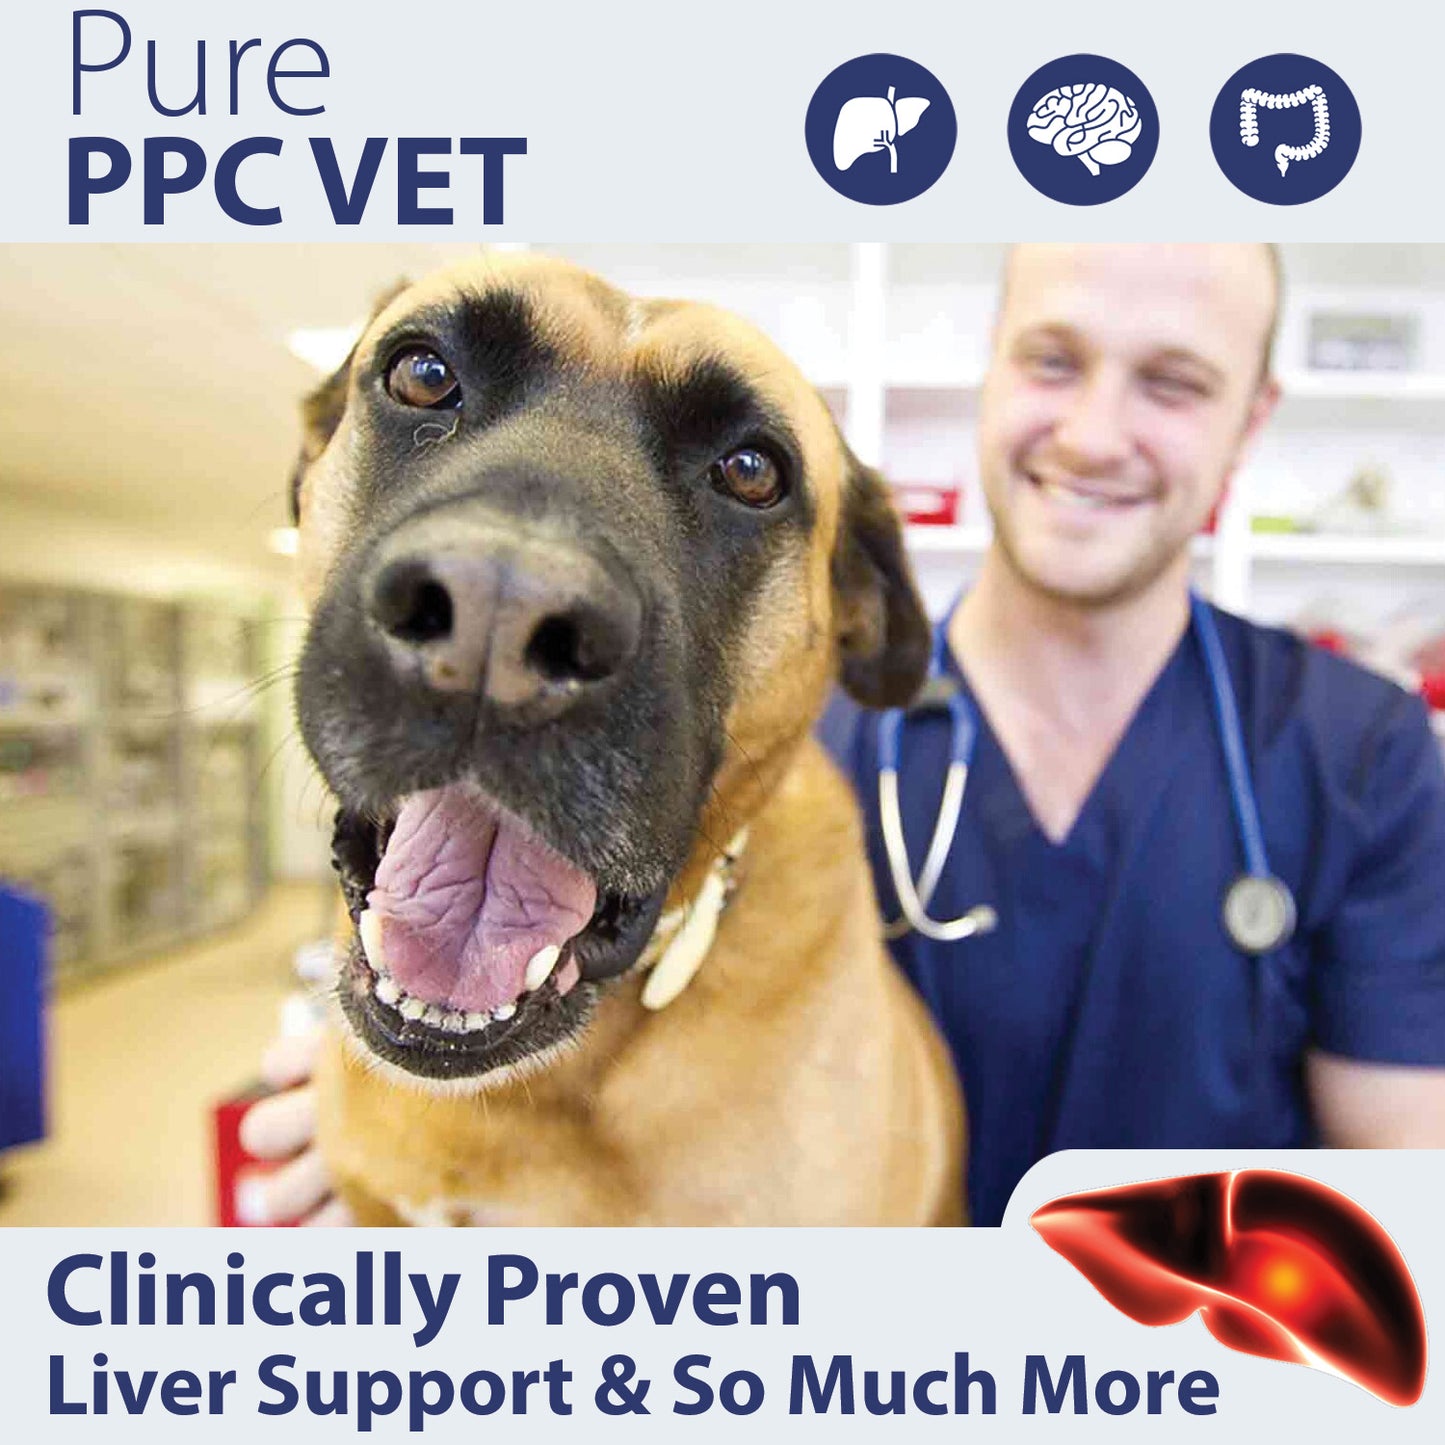 PhosChol PPC Vet for pet health, liver support and aging brain and neurological process.